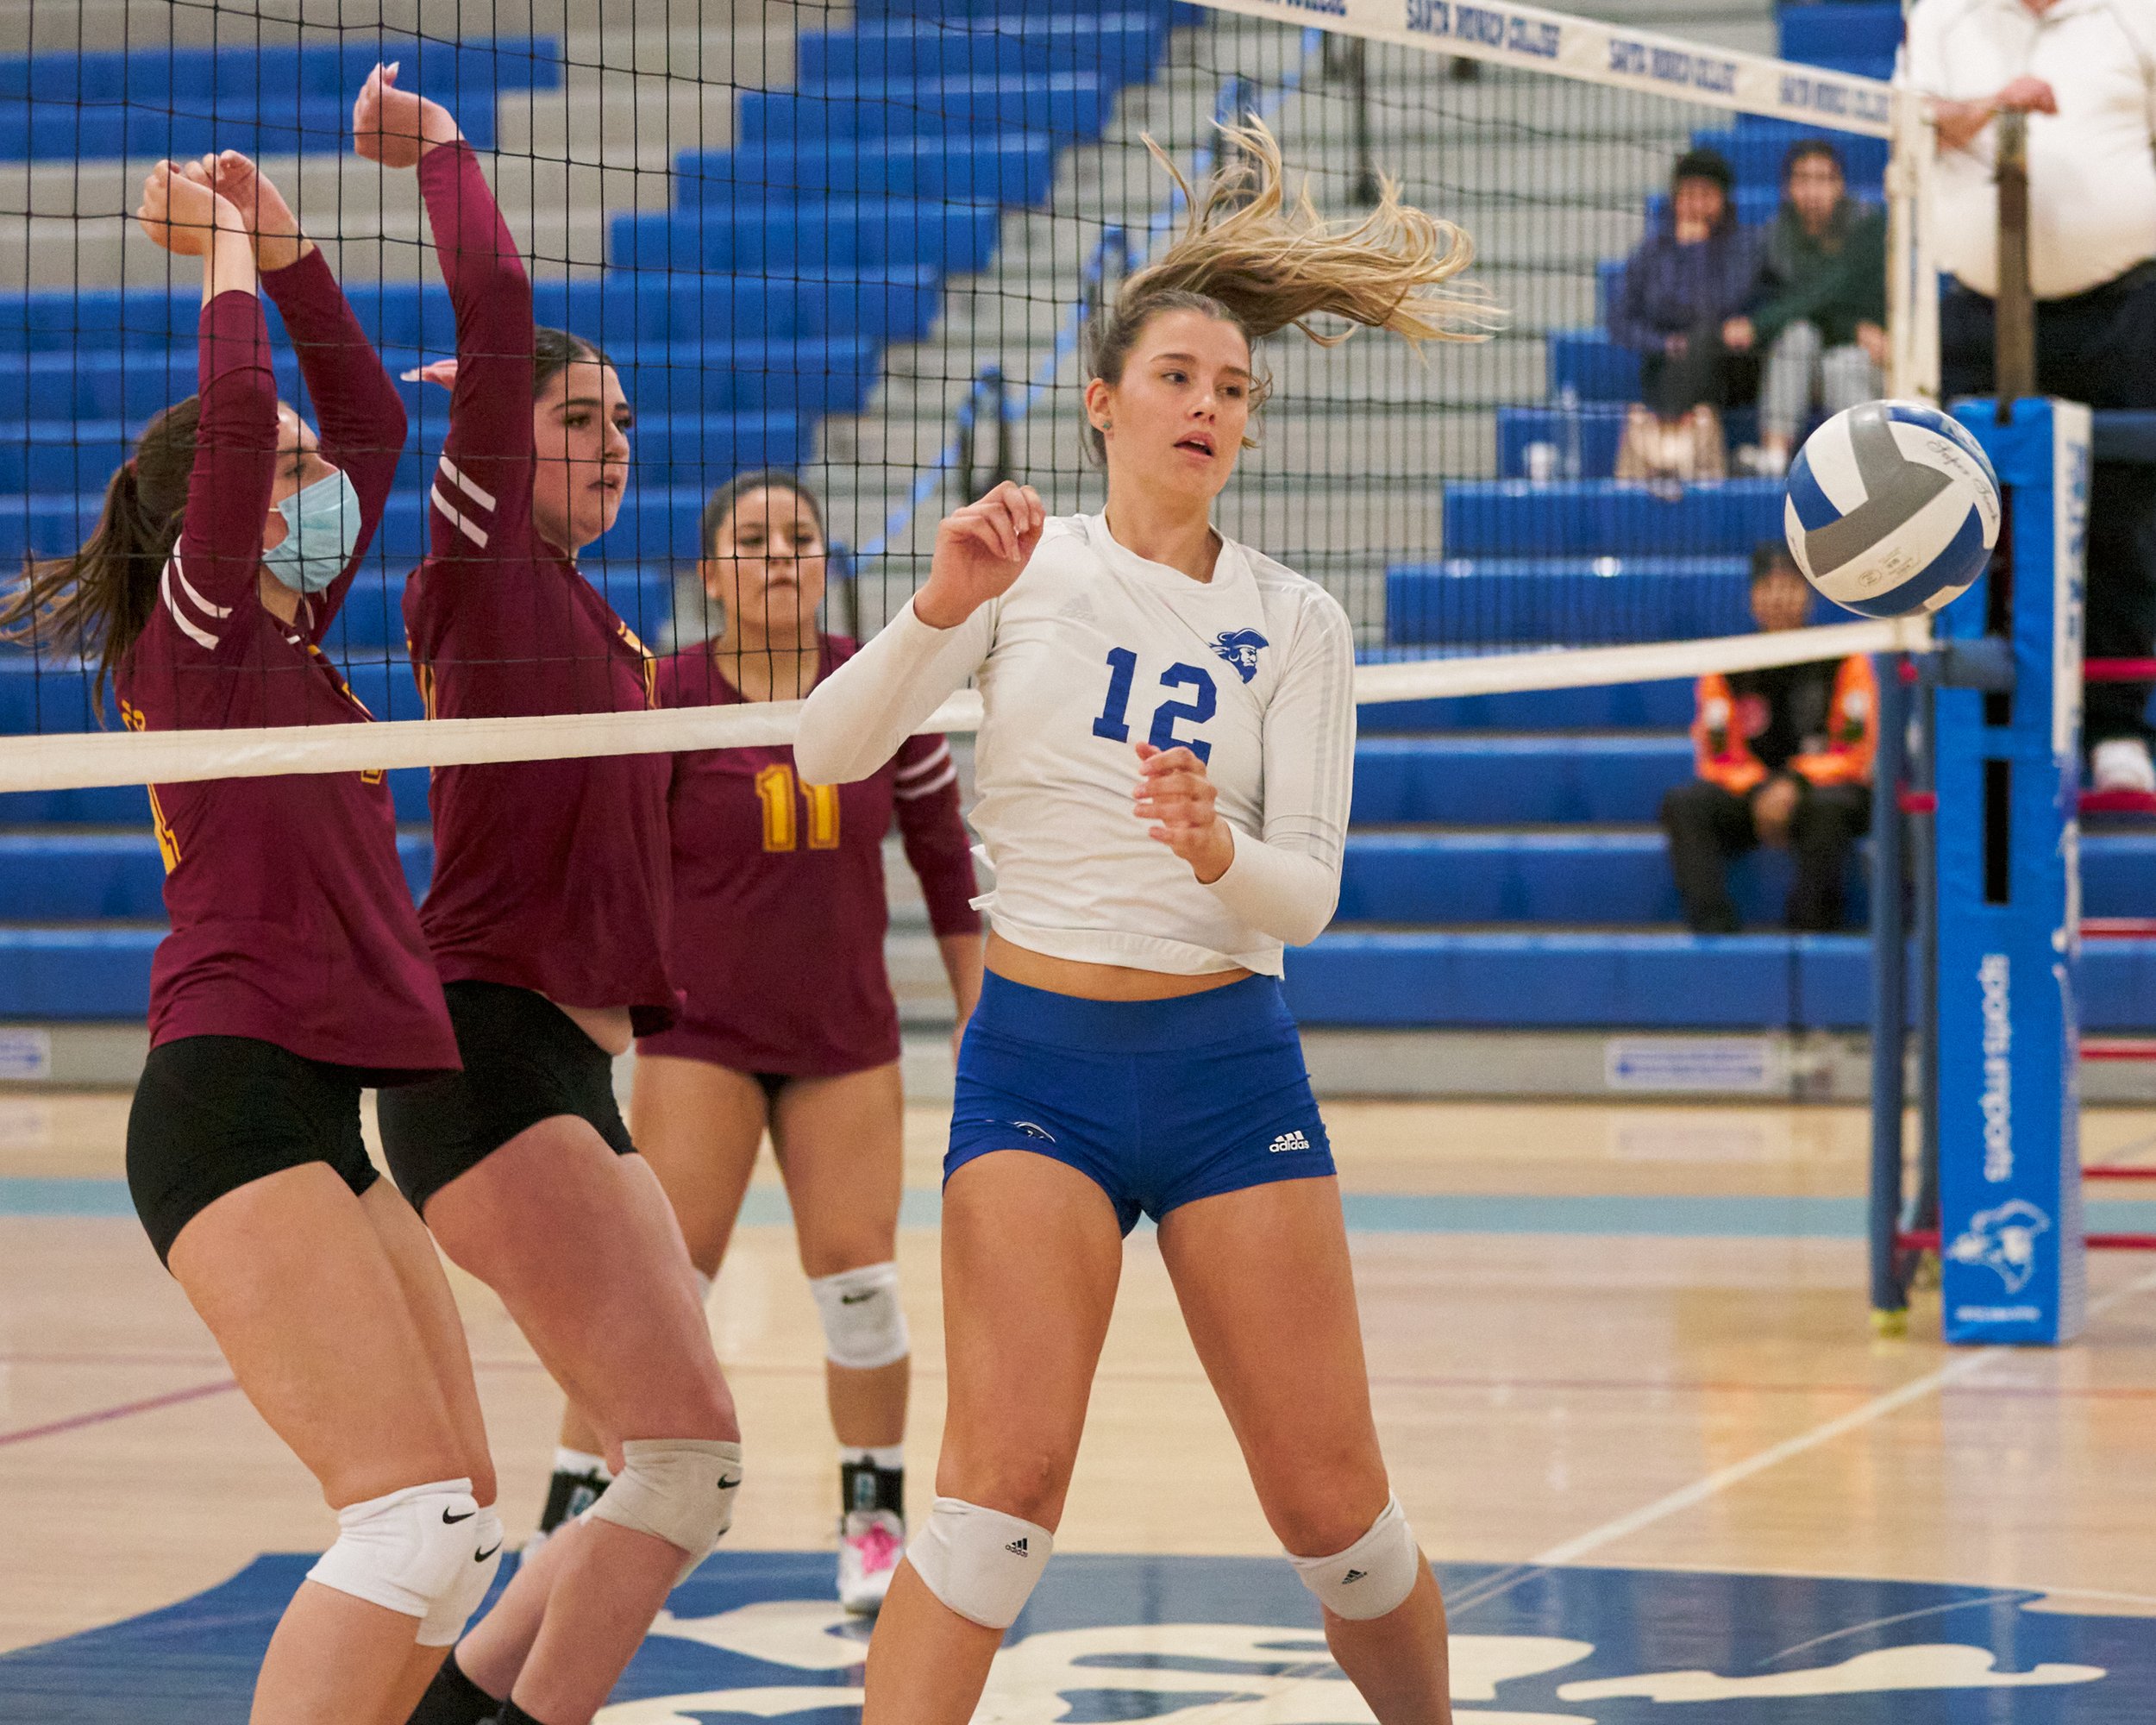  Glendale Community College Vaqueros' Katherine Marks and Bianca Hudson send the ball past Santa Monica College Corsairs' Mia Paulson during the women's volleyball match on Wednesday, Nov. 9, 2022, at SMC Gym in Santa Monica, Calif. The Corsairs won 